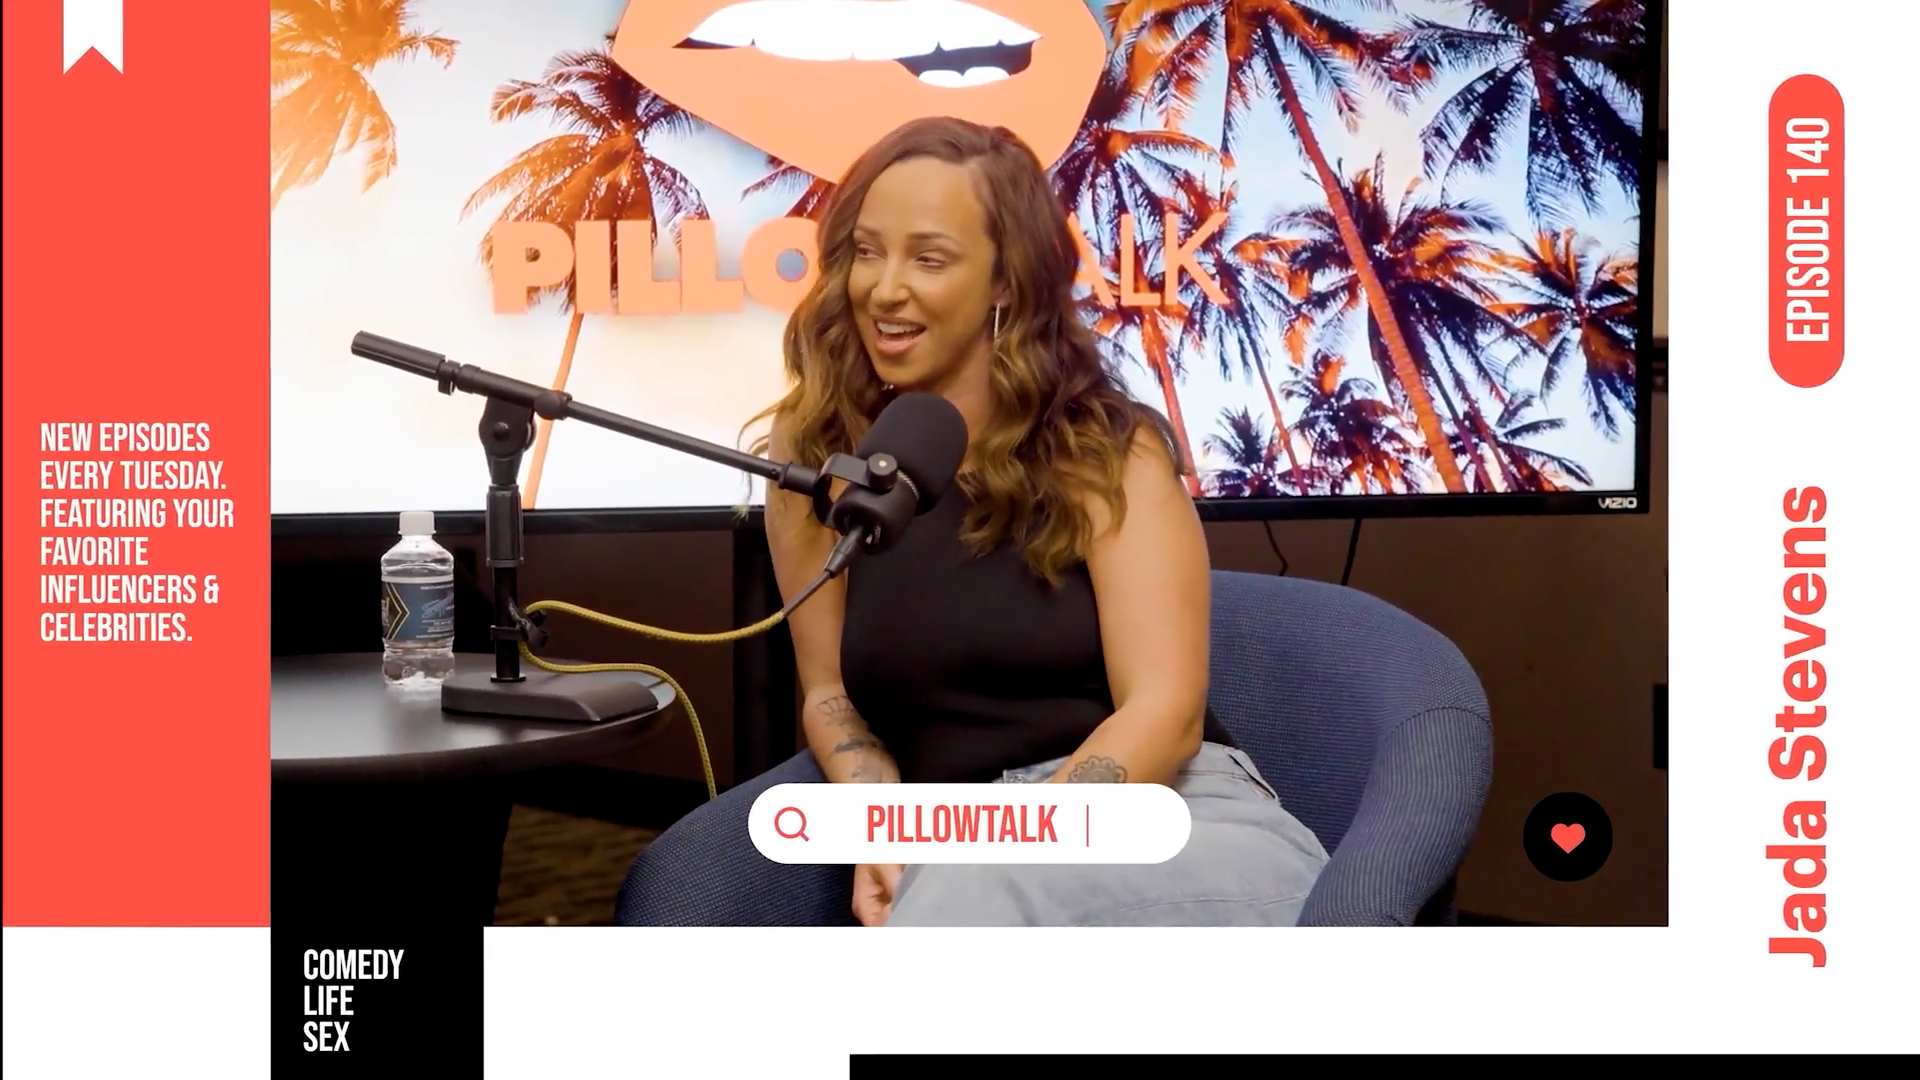 Ryan Pownall's Pillow Talk Podcast features guests Jada Stevens and Phoenix Marie.